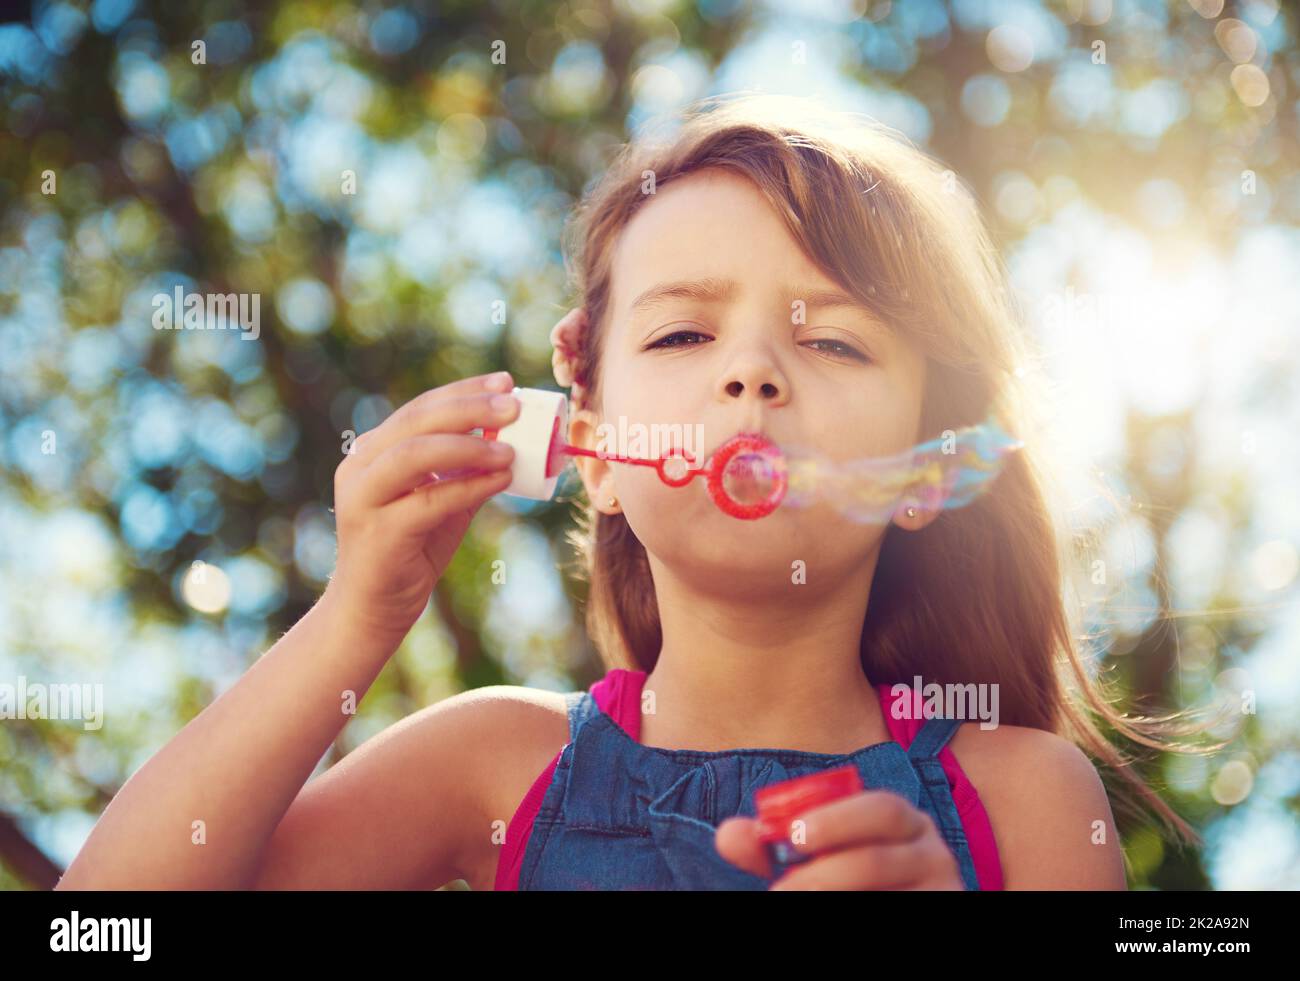 Keep calm and blow bubbles. Shot of a cute young girl blowing bubbles outside. Stock Photo